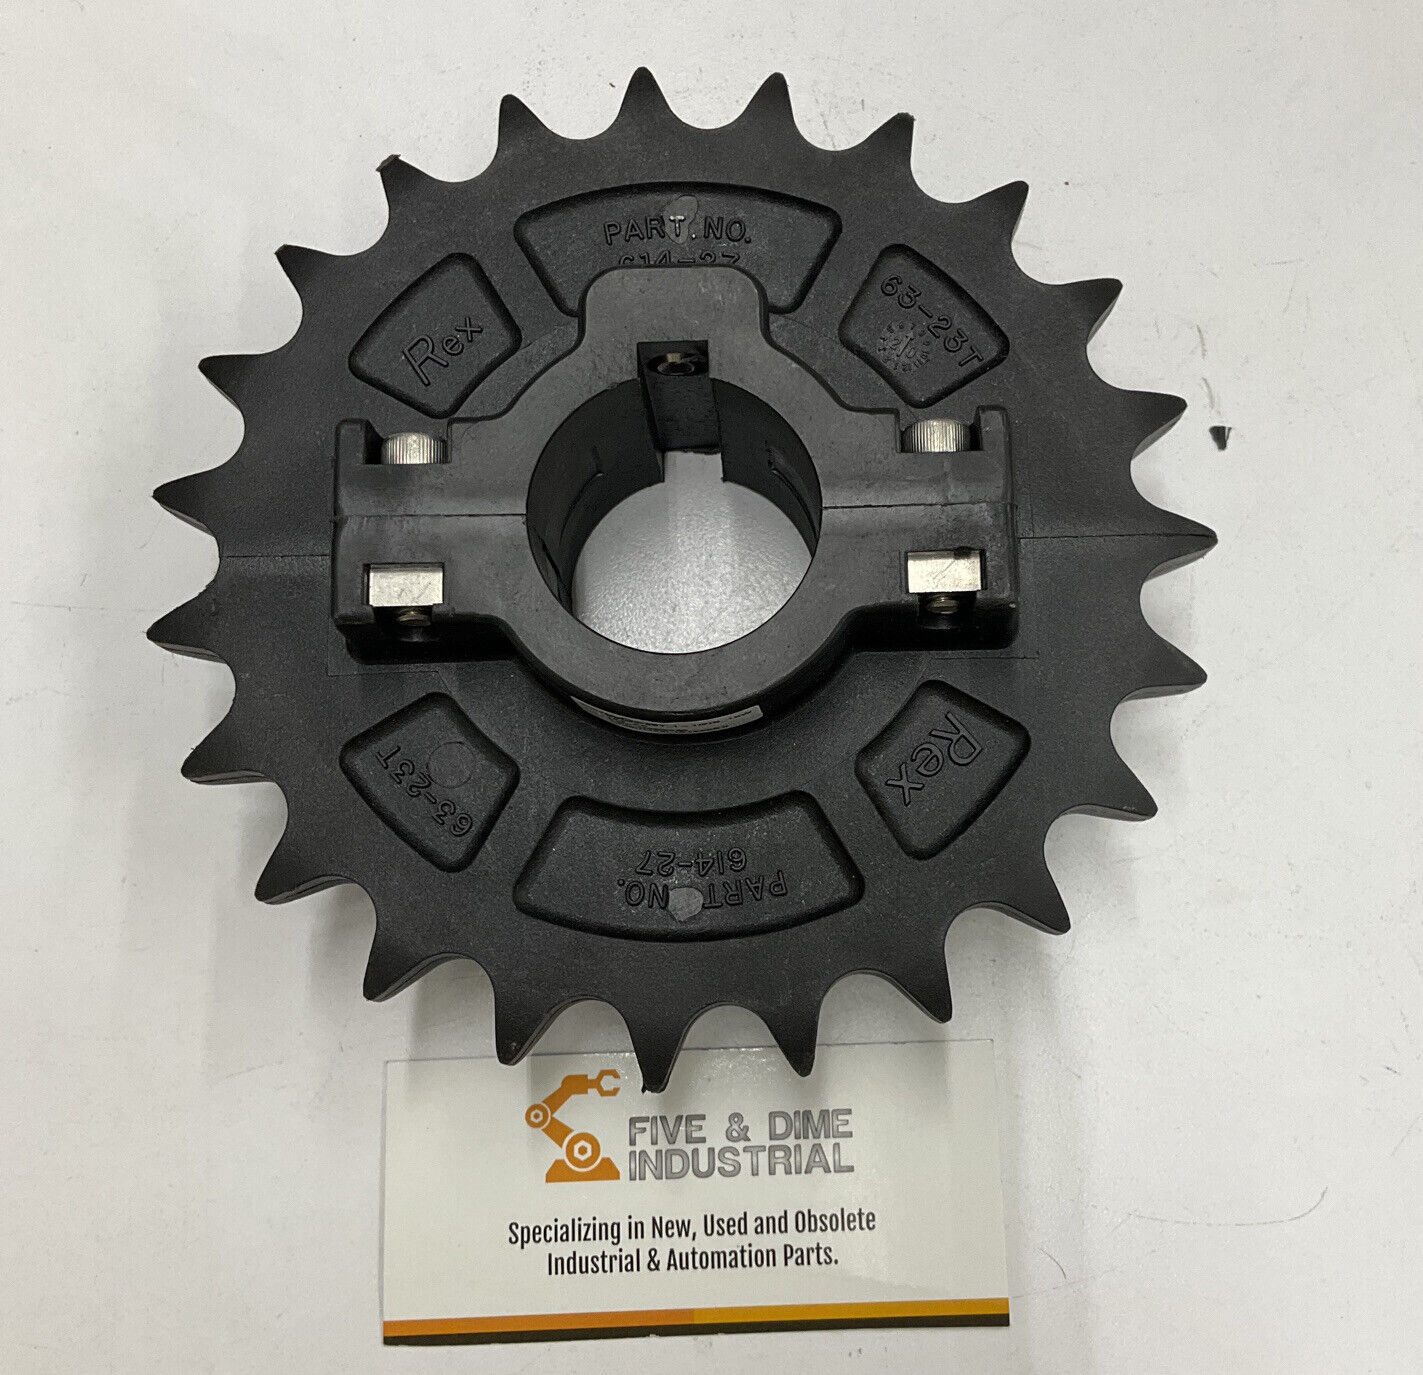 Rexnord 614-27 / 63-23T 2-Piece Sprocket 1-1/2" Bore (YE181)